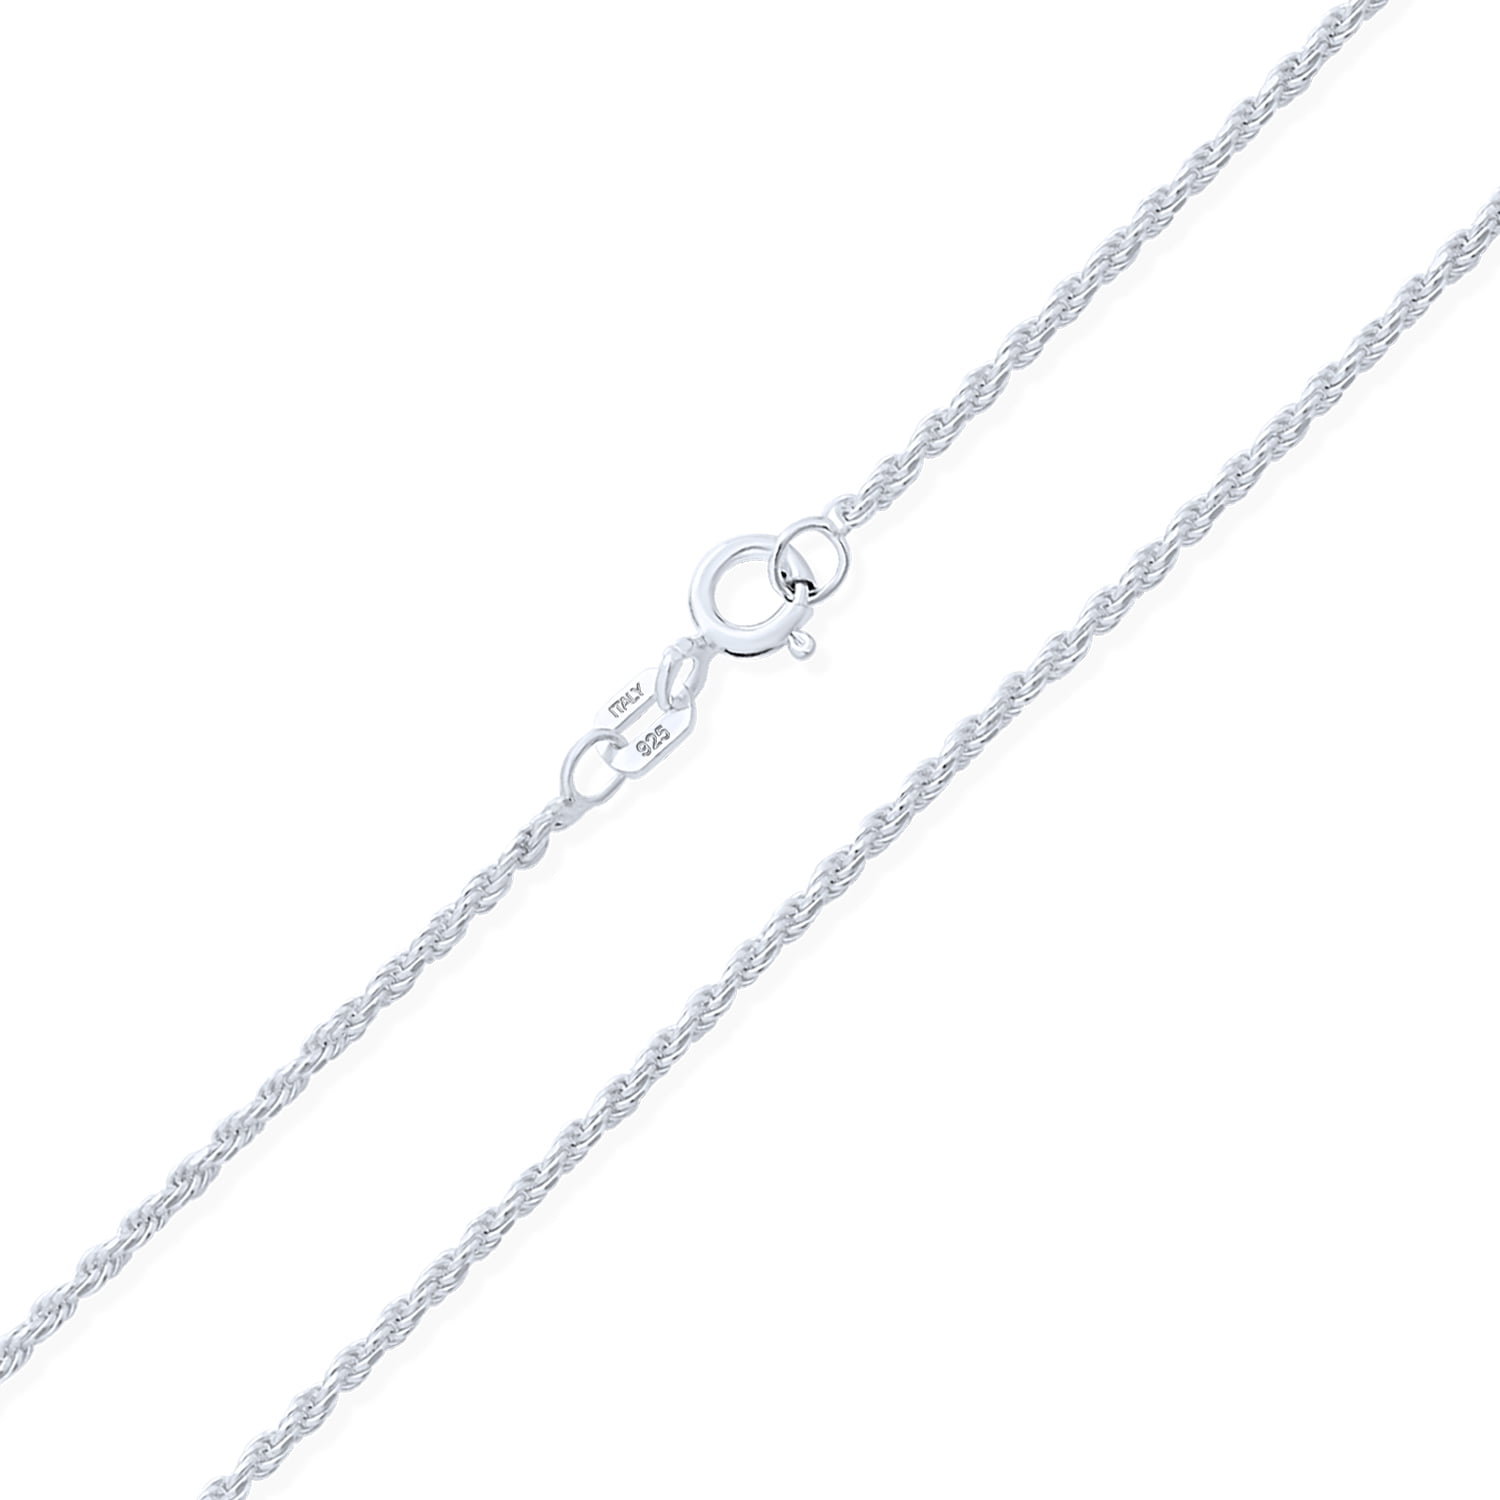 1 Necklace 1.5mm Stainless Steel Cable Chain Necklaces 18" N743 